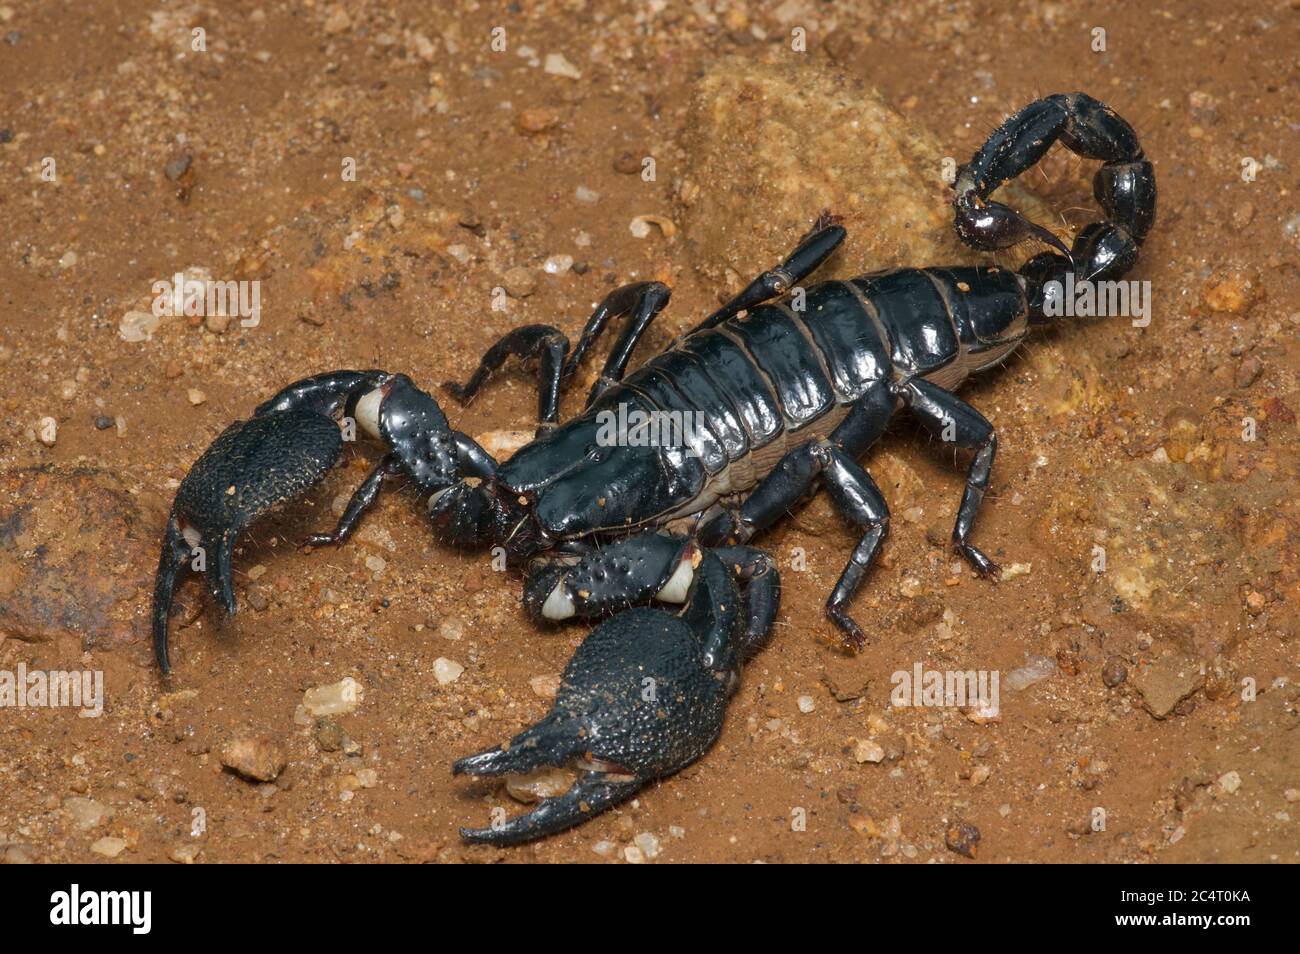 A giant forest scorpion (Heterometrus indus) showing off its huge claws and stinger near Knuckles Forest Reserve, Matale district, Sri Lanka Stock Photo